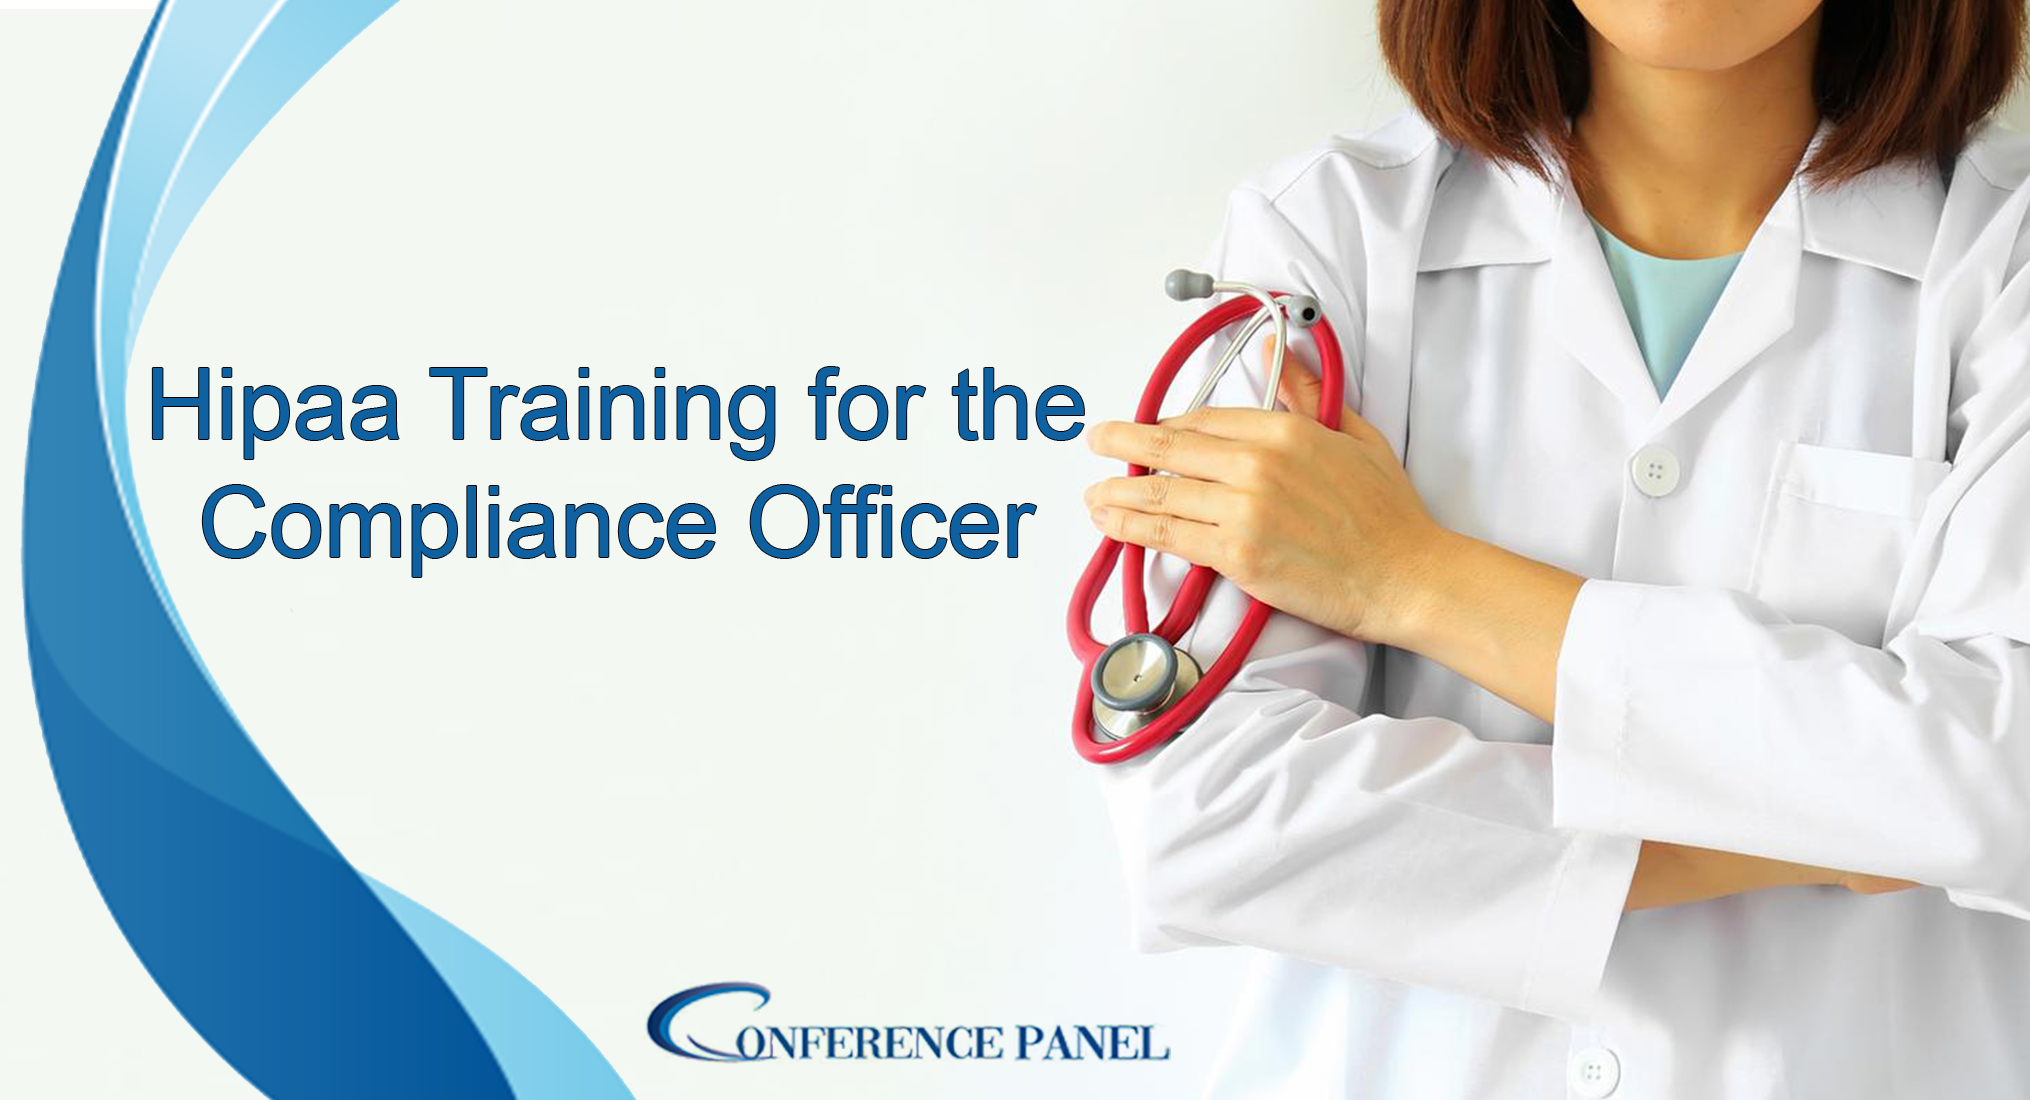 HIPAA Training for the Compliance Officer